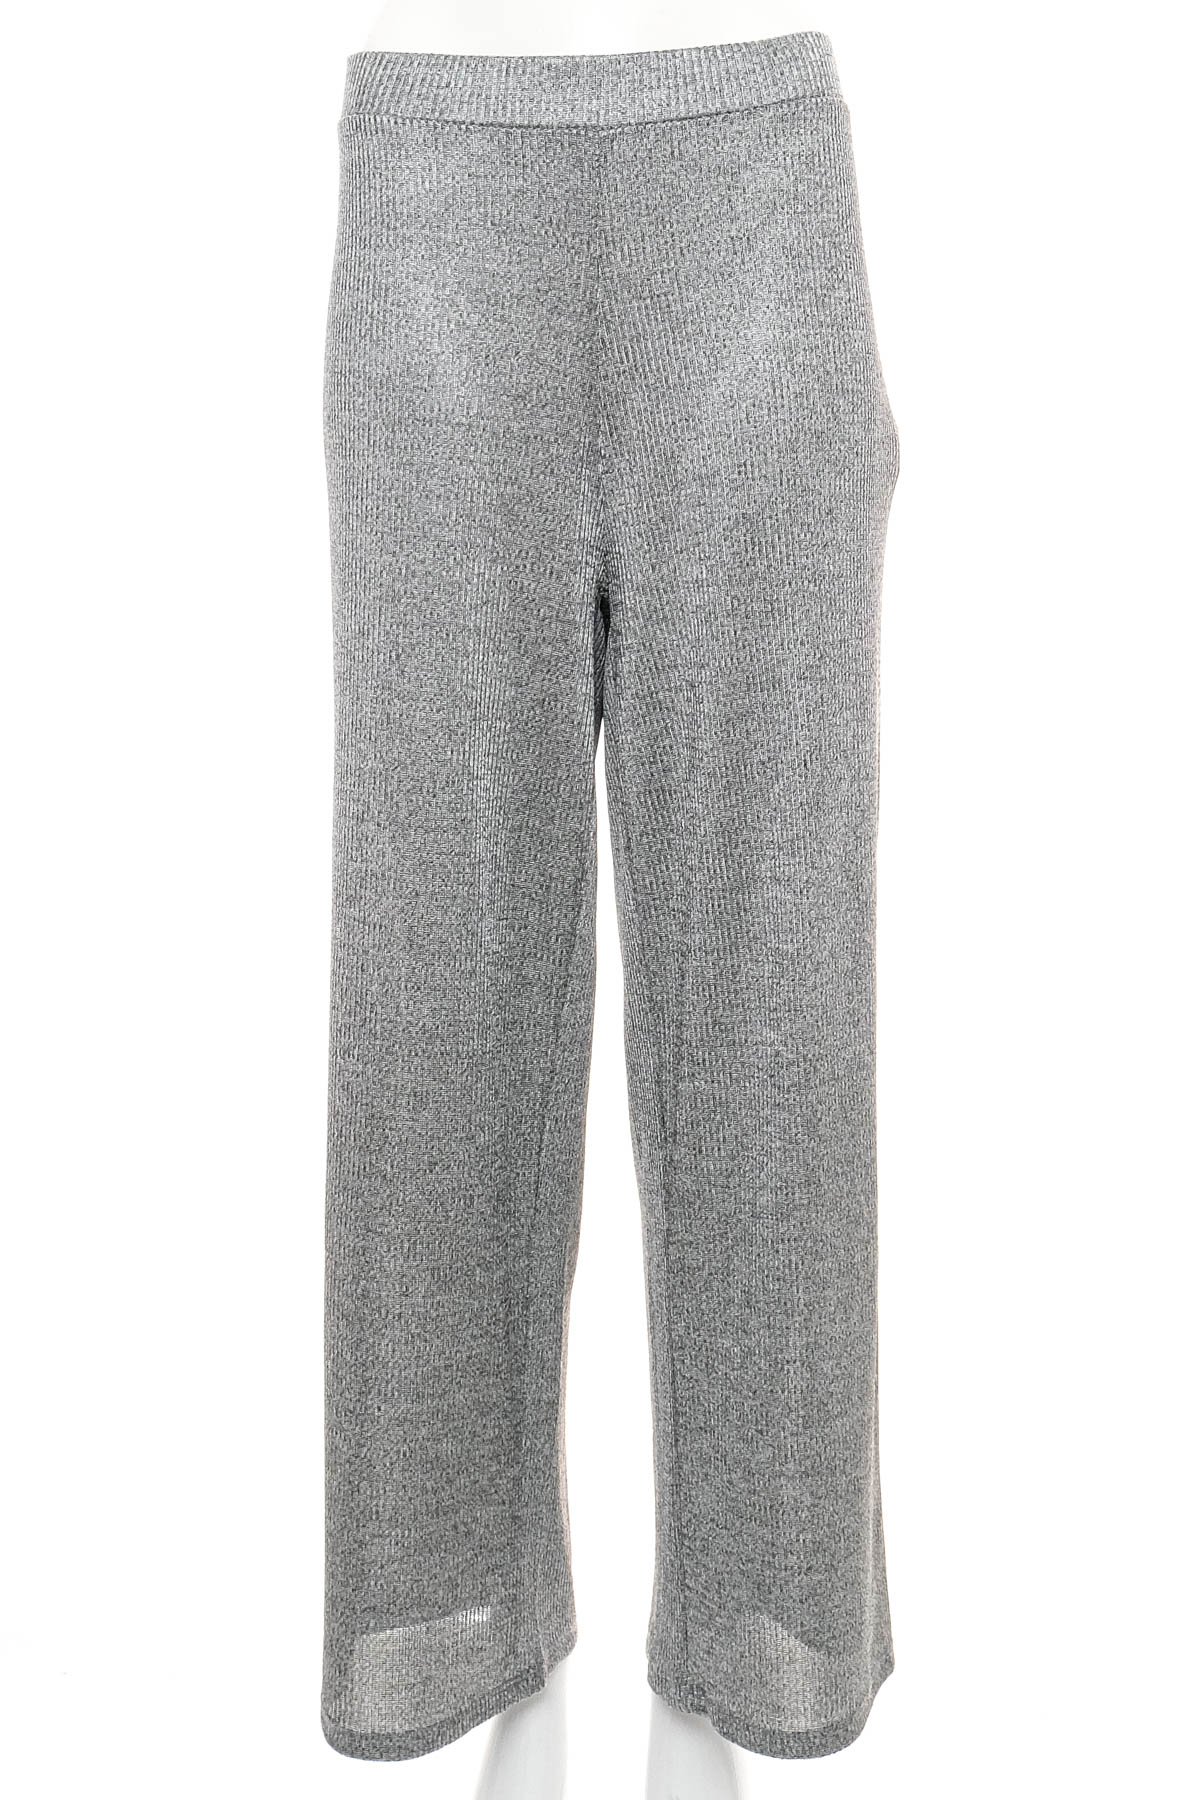 Women's trousers - LCW MODEST - 0